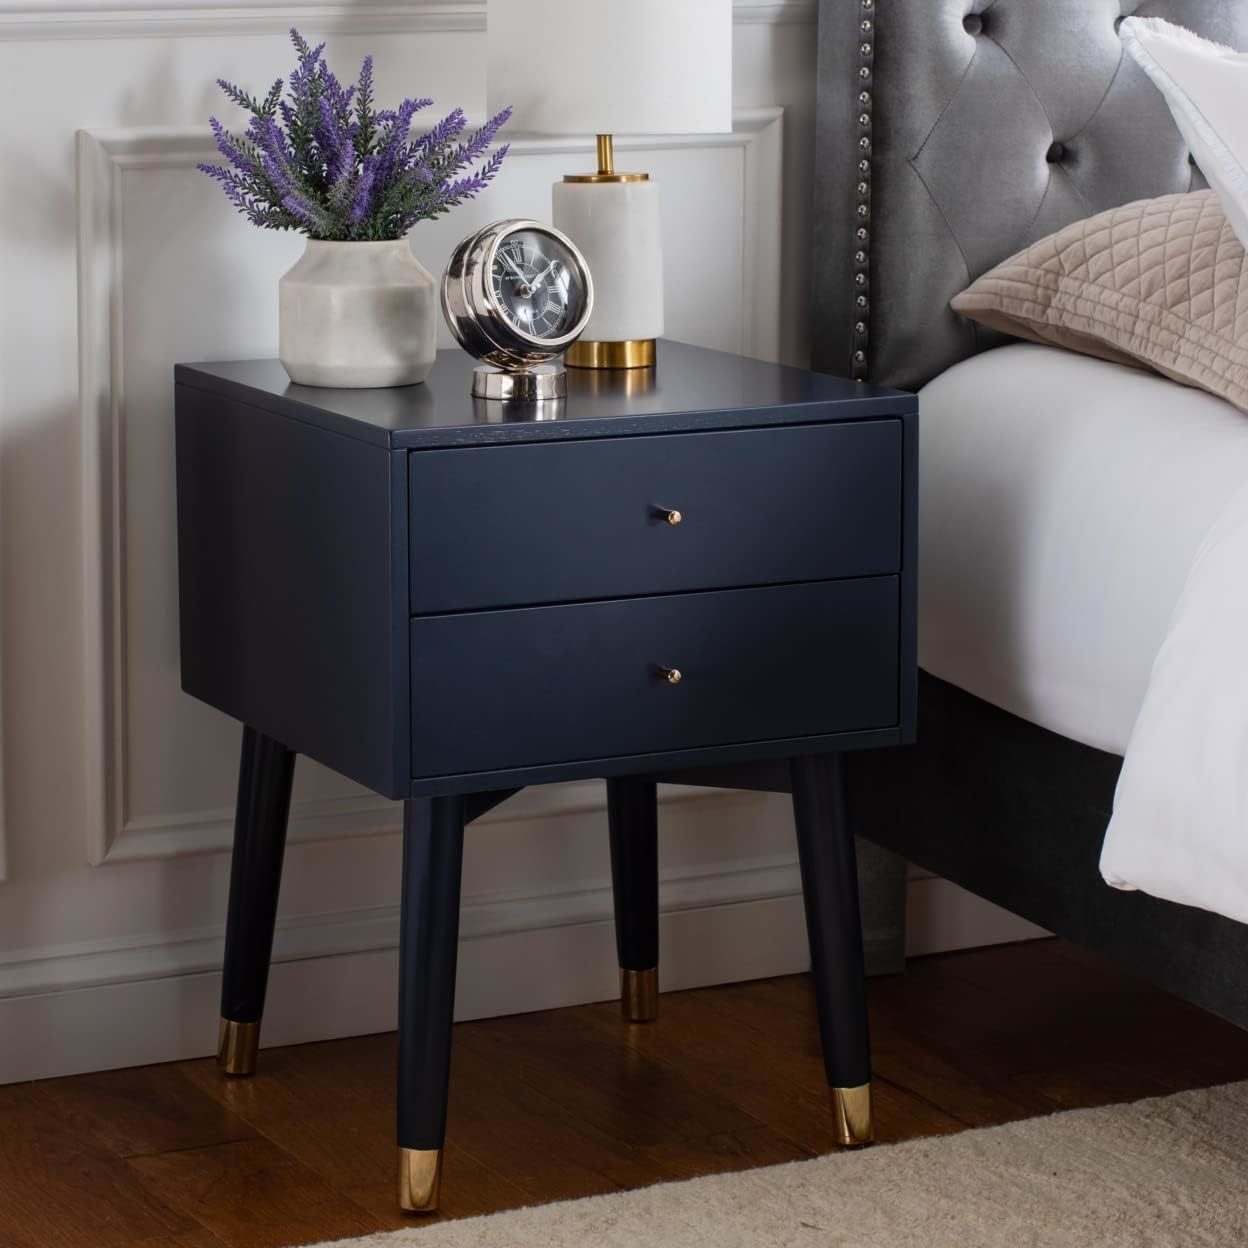 Mid-Century Modern Nightstand In Navy Blue And Gold From Safavieh Home - $255.93